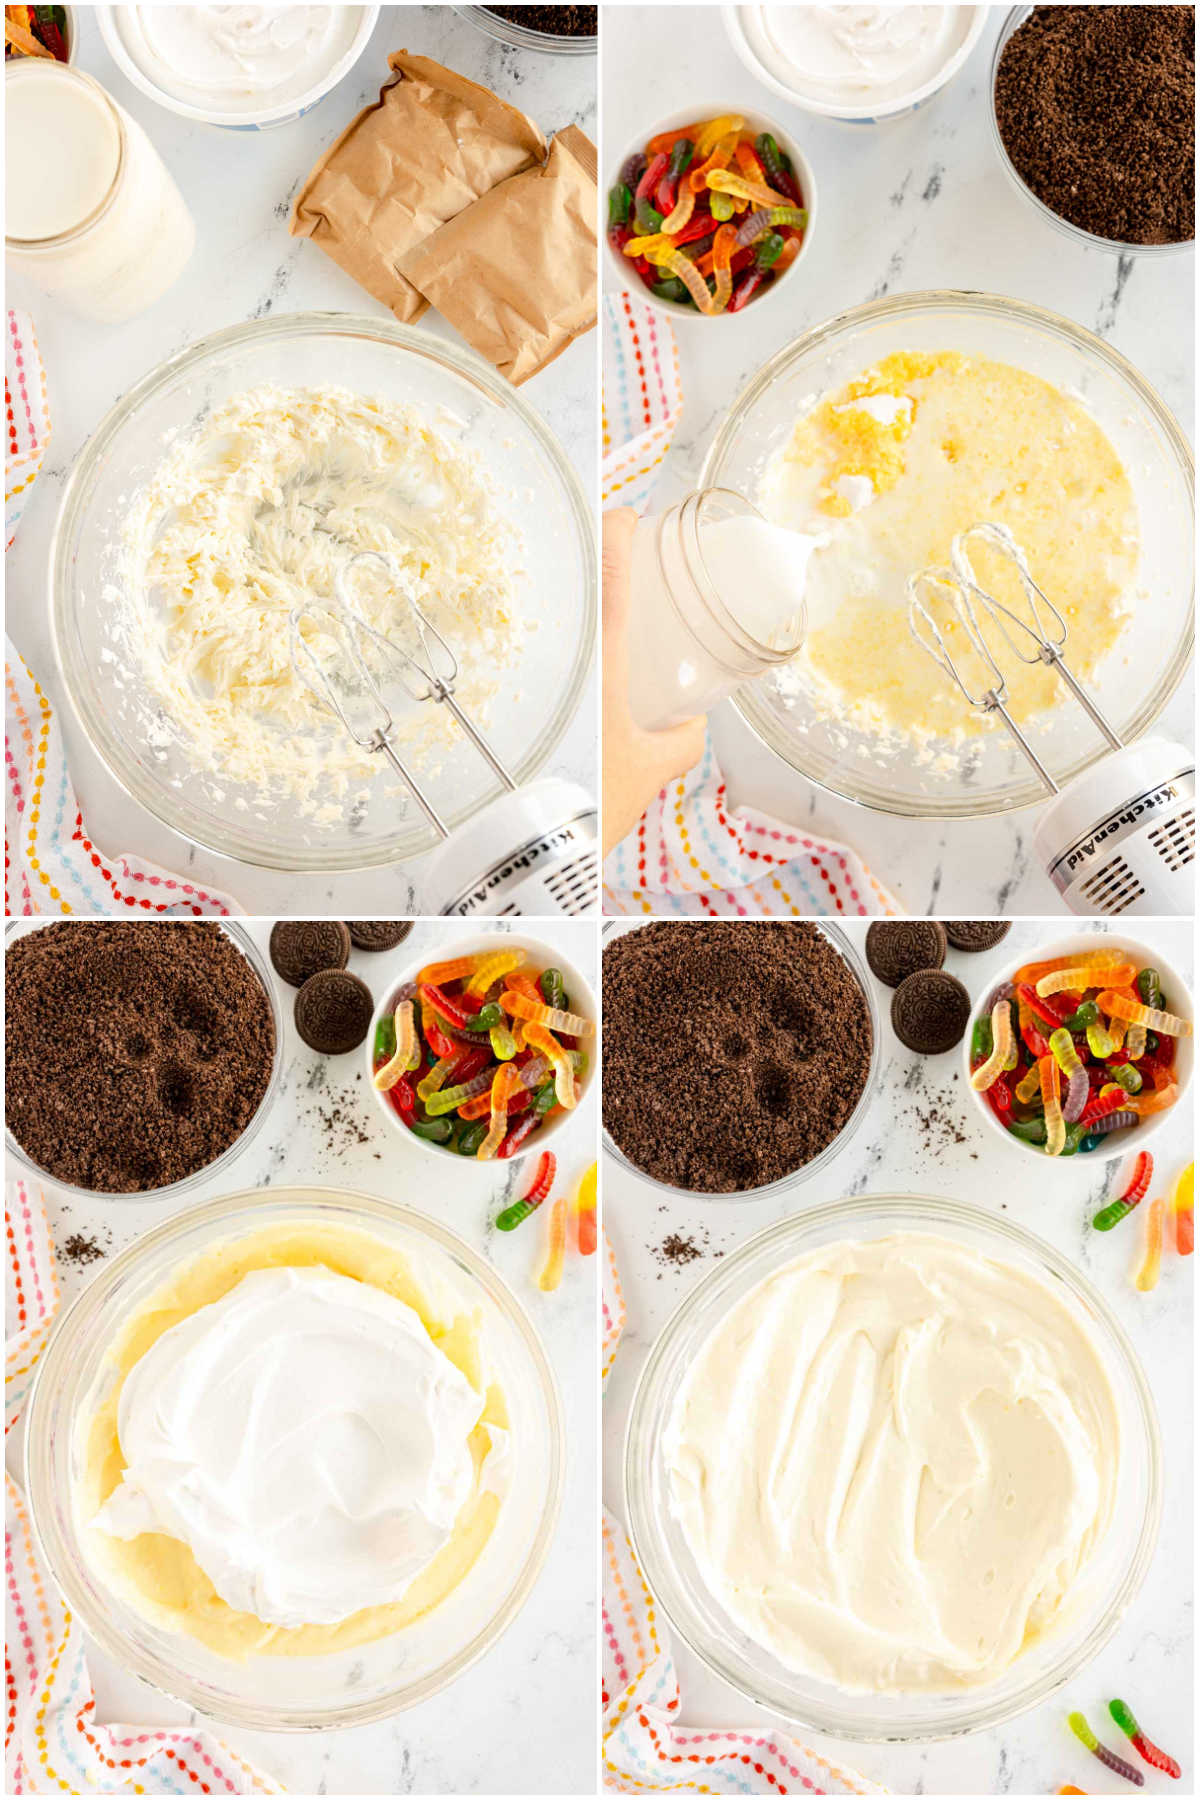 Four images in a collage showing the process of making pudding